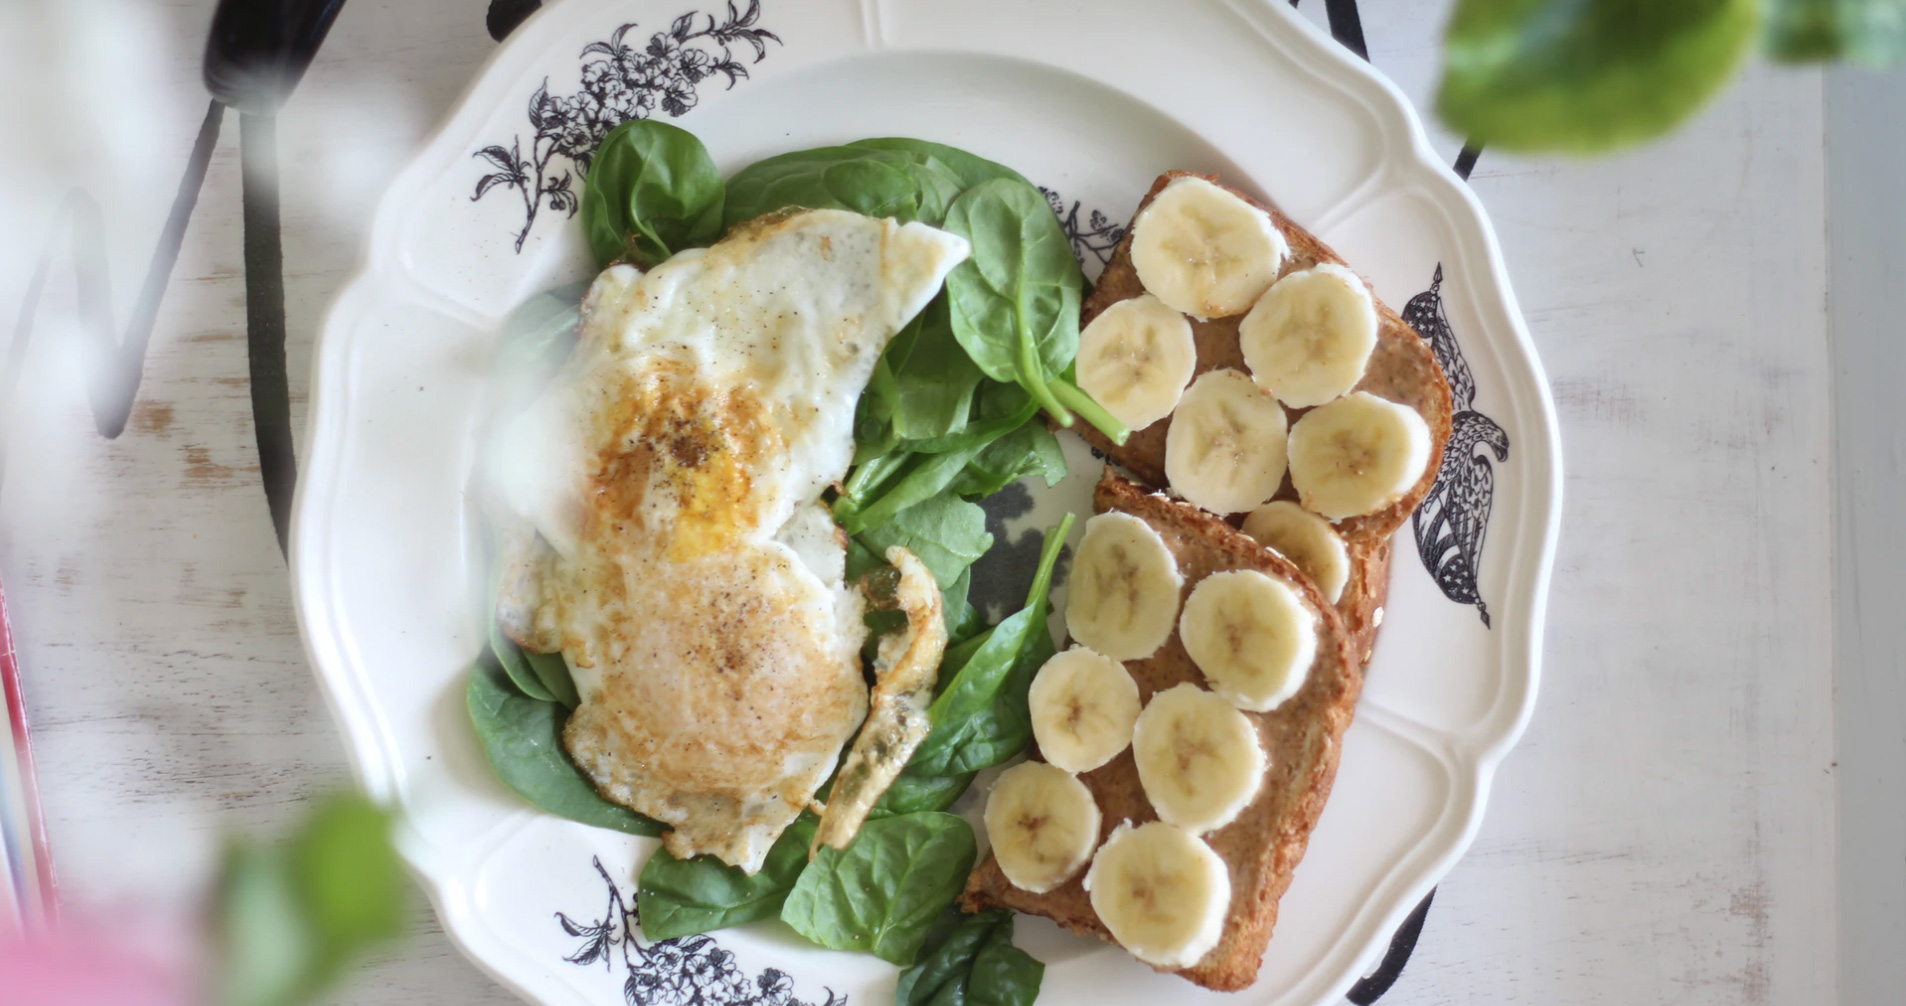 Healthy Breakfast of eggs spinach, bananas, and whole-wheat toast - Unsplash: Naomi Irons